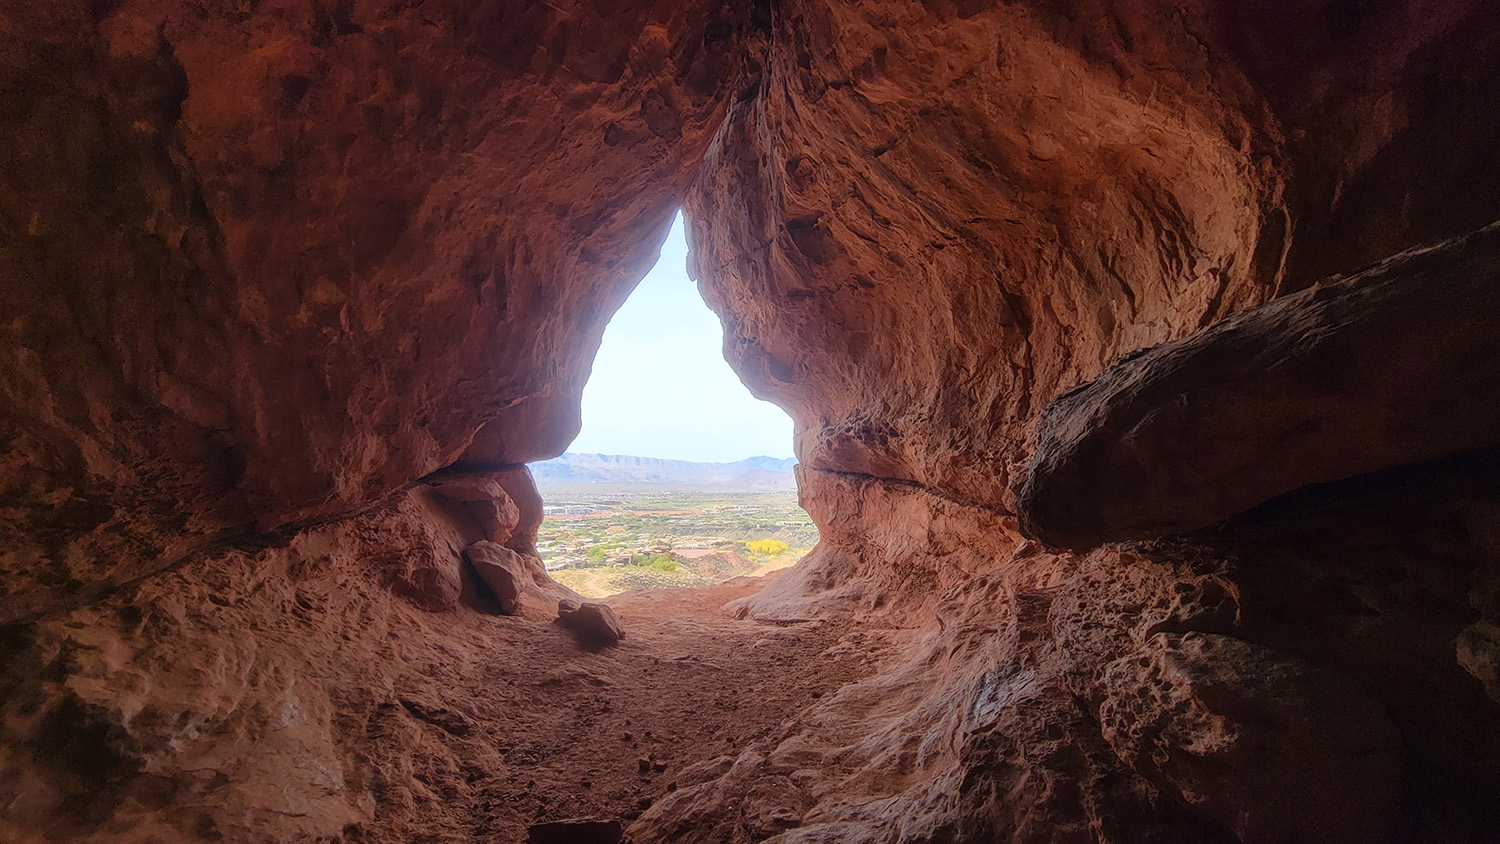 Sunday Drive - Take a Hike To Scout Cave